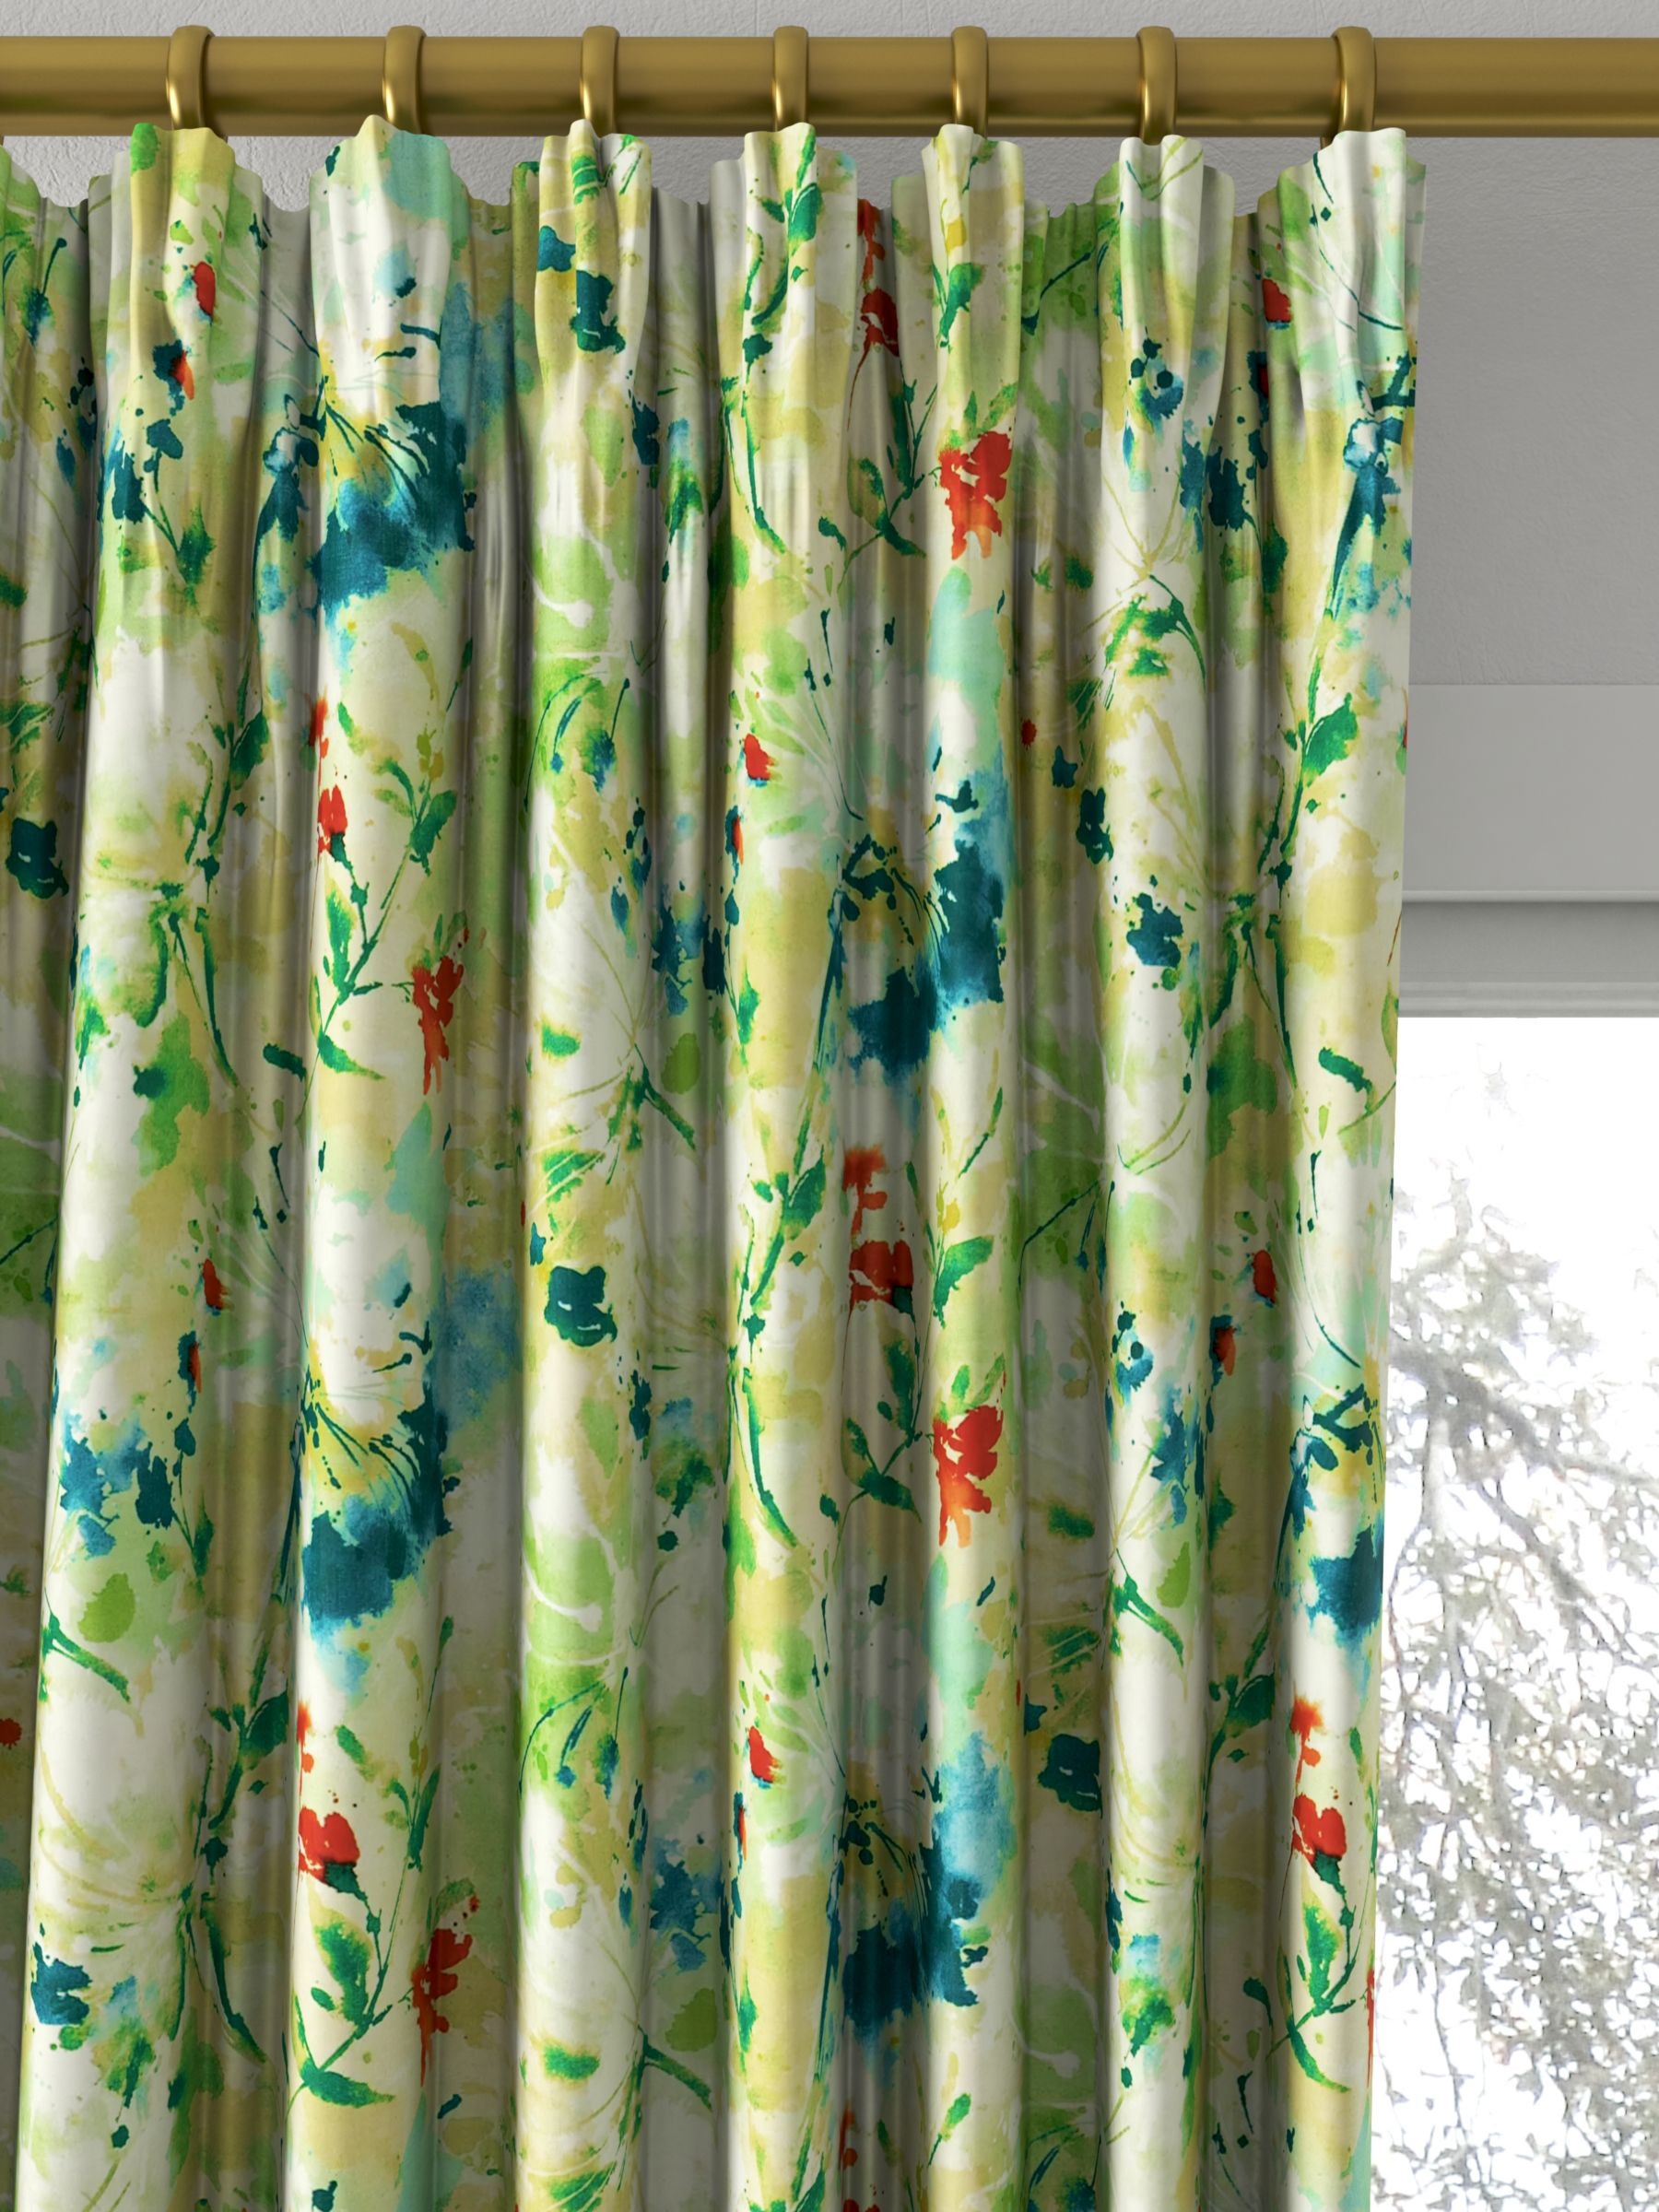 Sanderson Simi Made to Measure Curtains, Spring